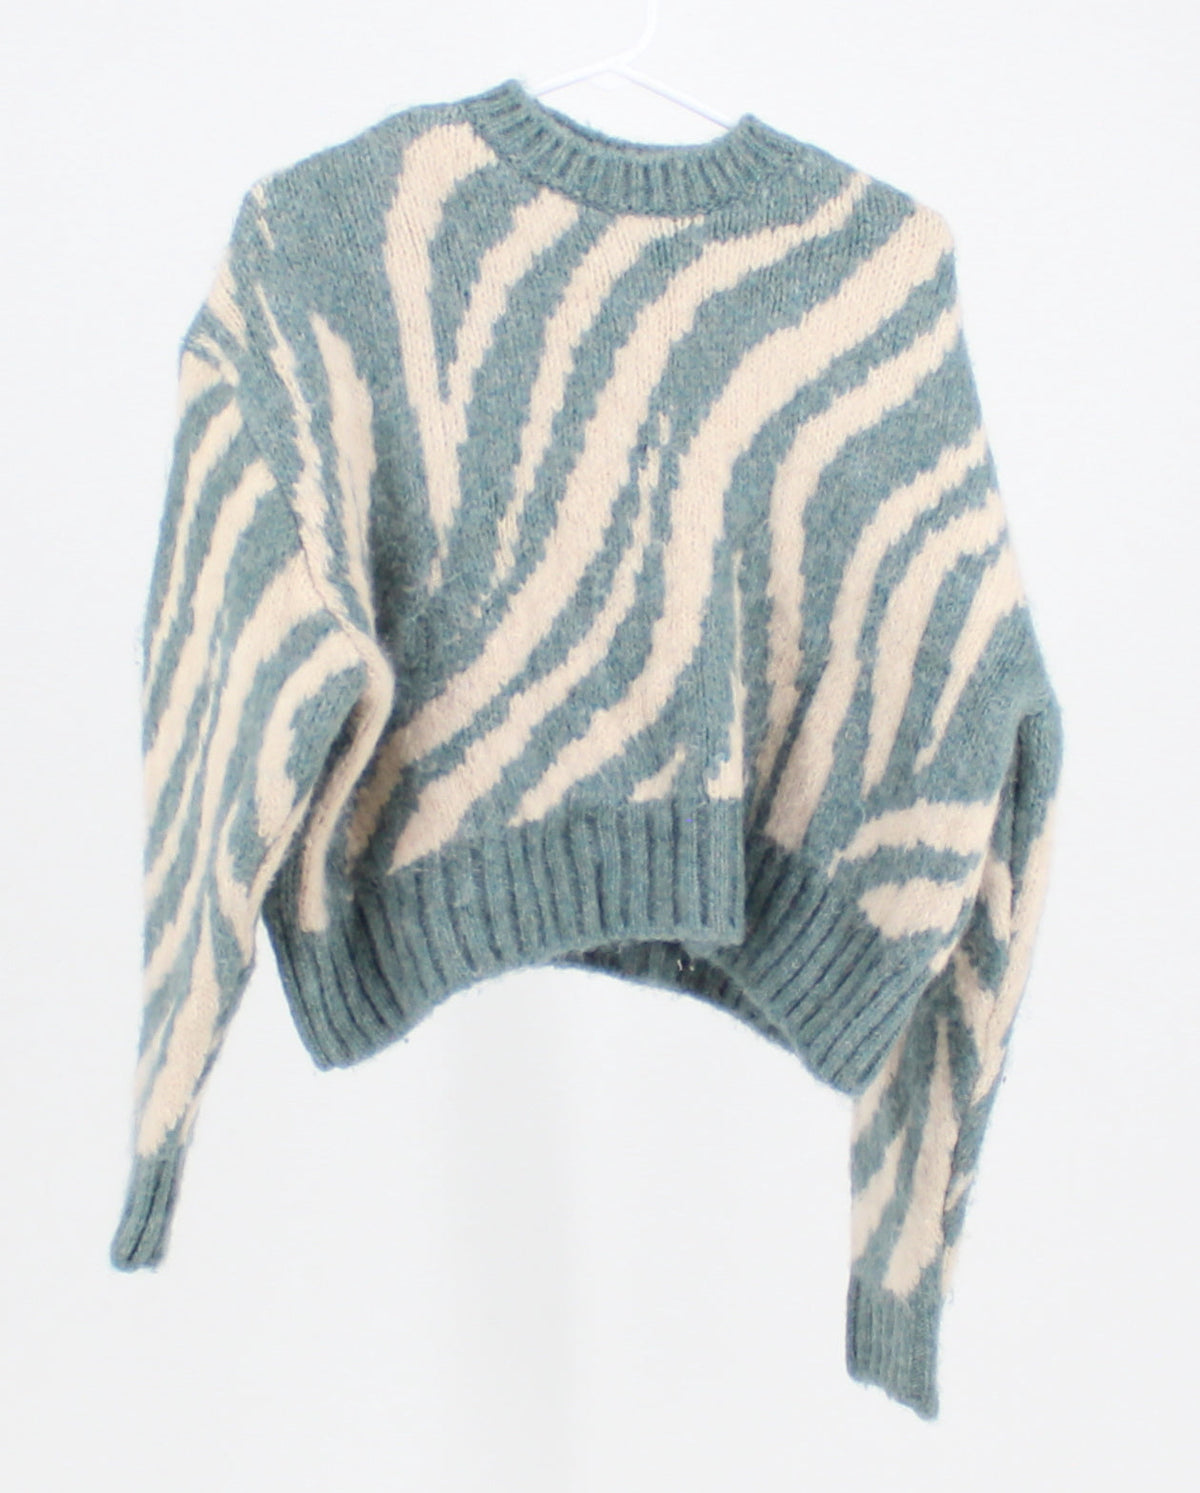 Zara Blue and Cream Patterned Wool Sweater